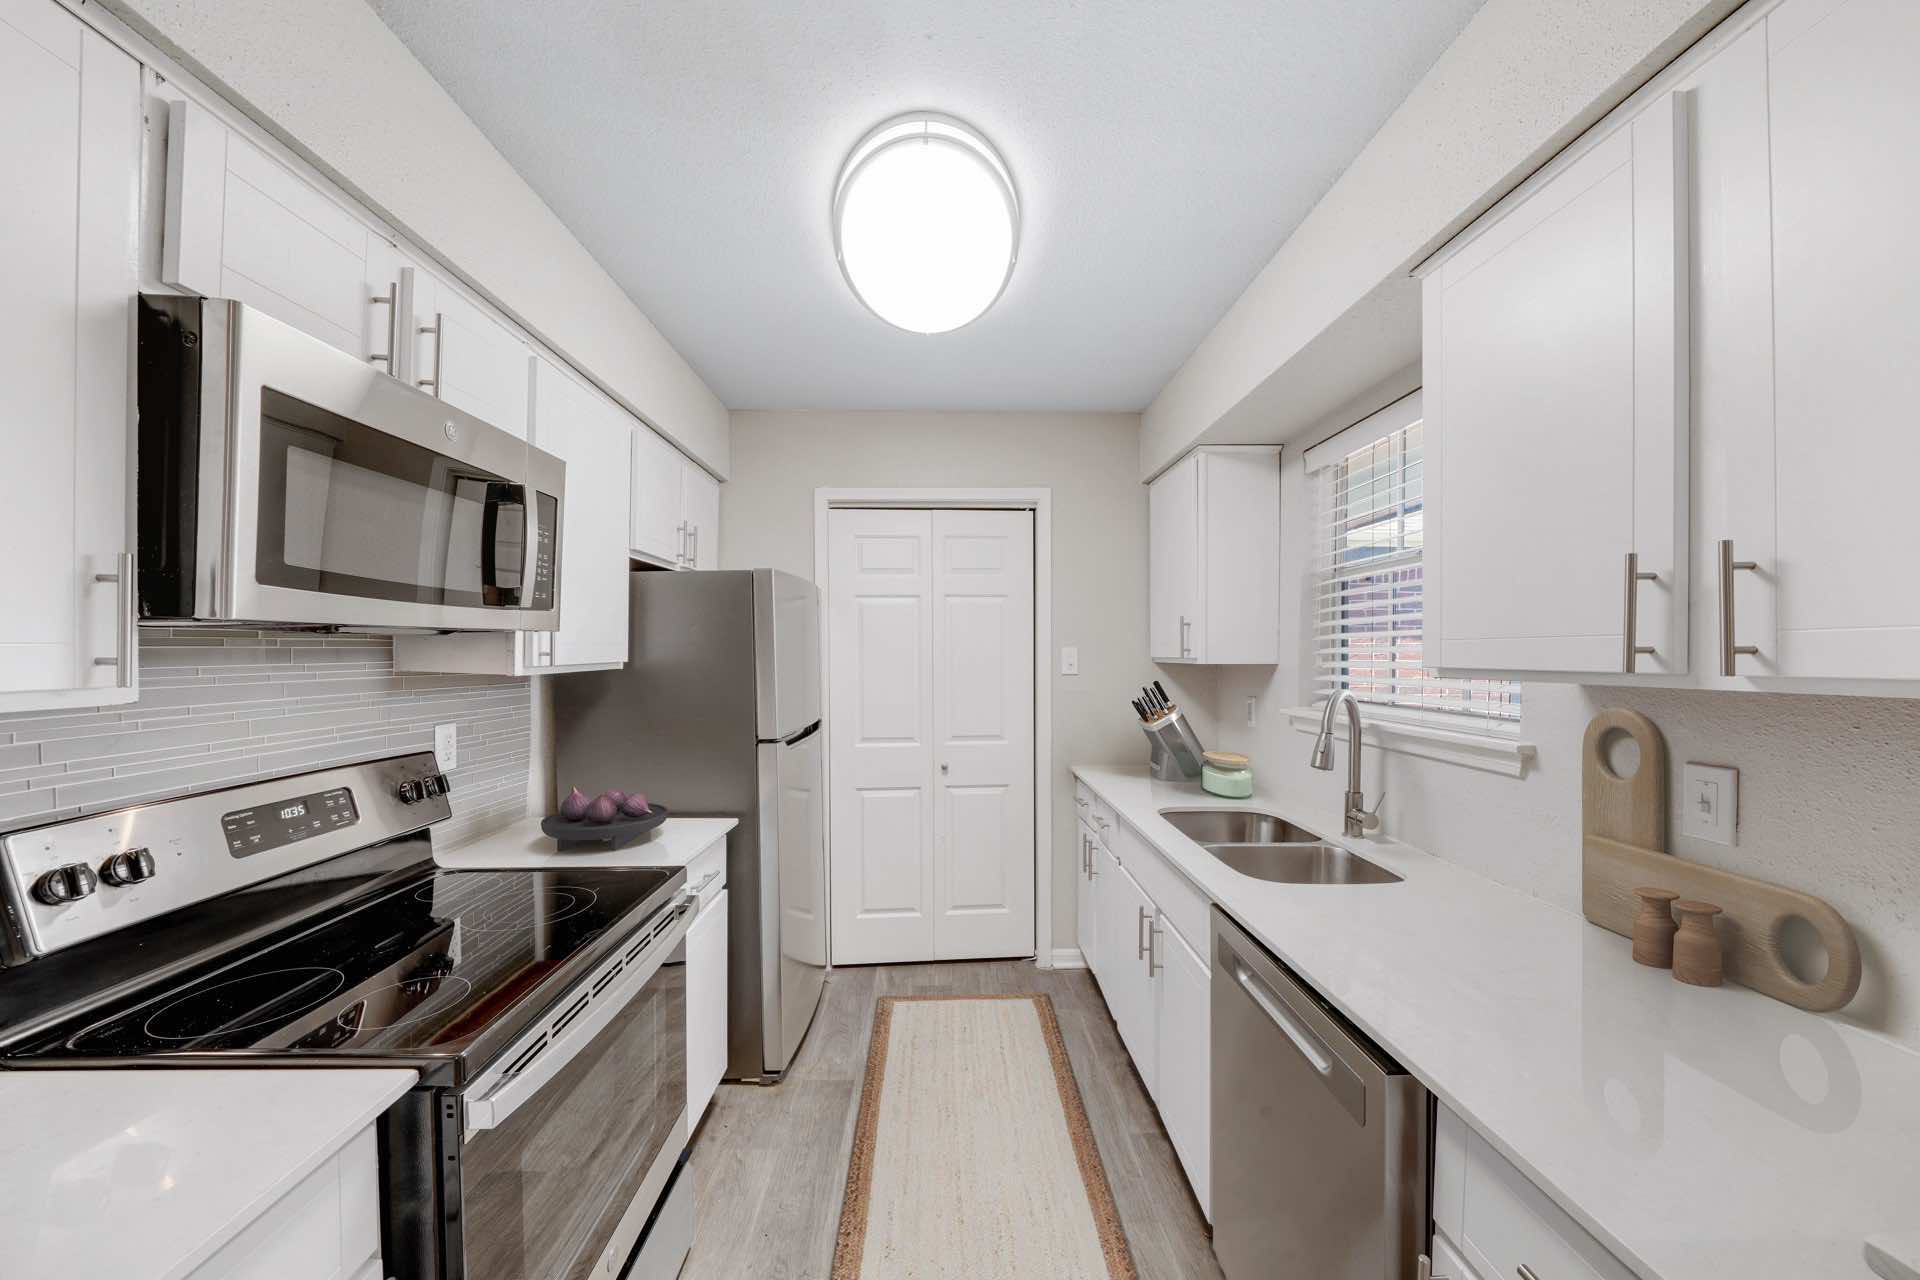 kitchen with wood style flooring and ample lighting